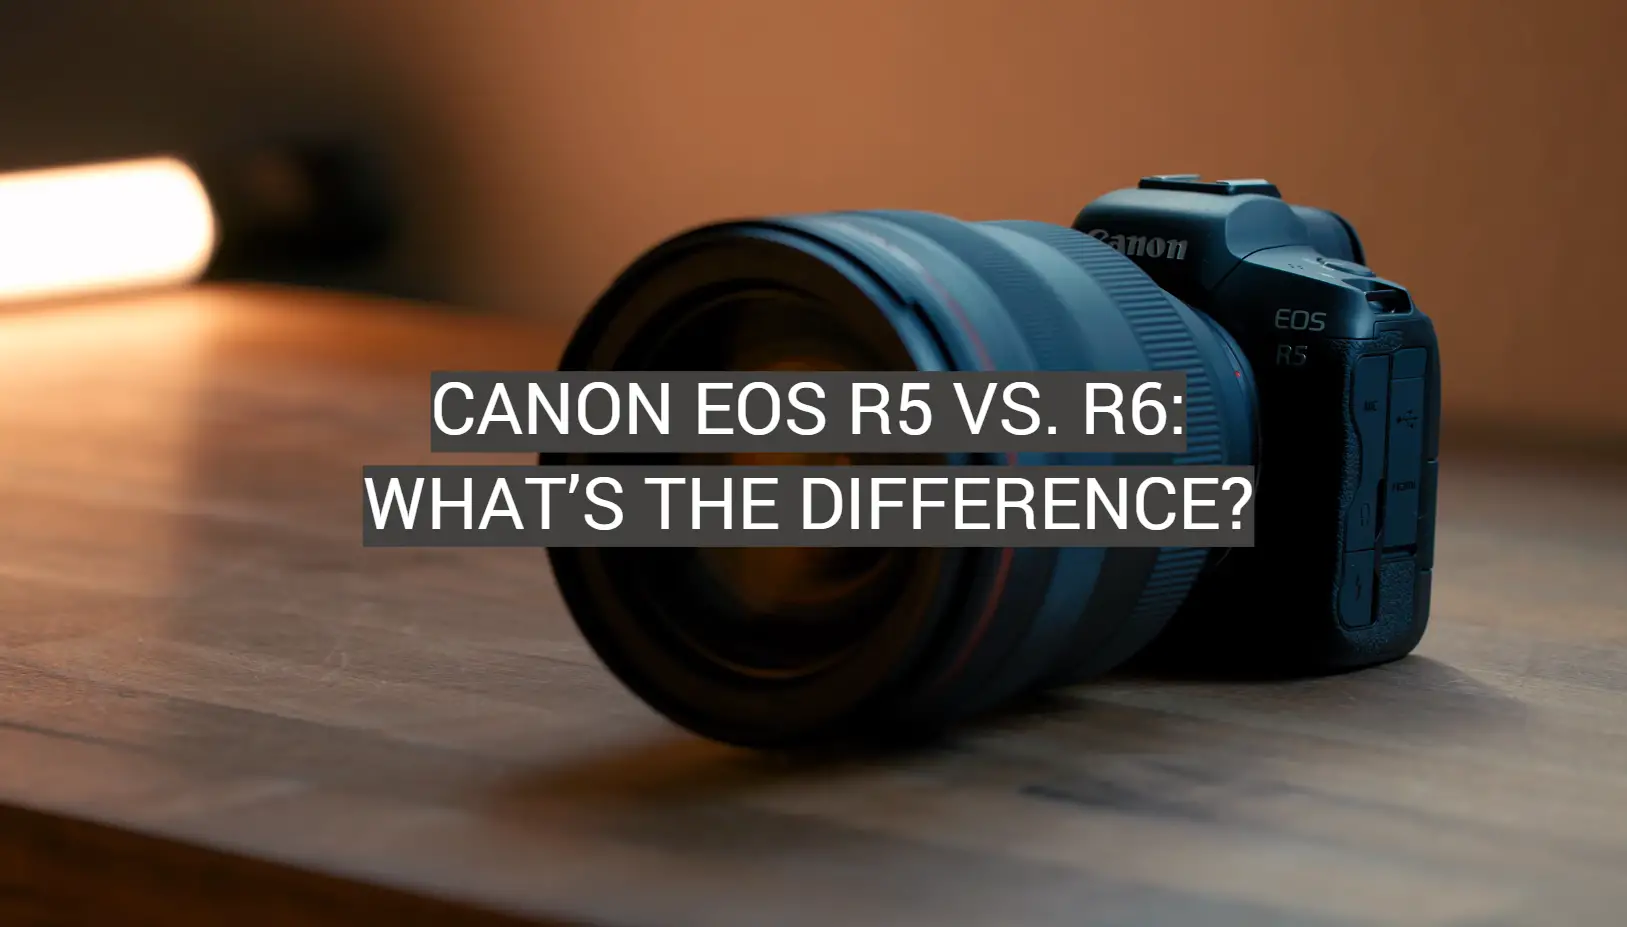 Canon EOS R5 vs. R6: What’s the Difference?